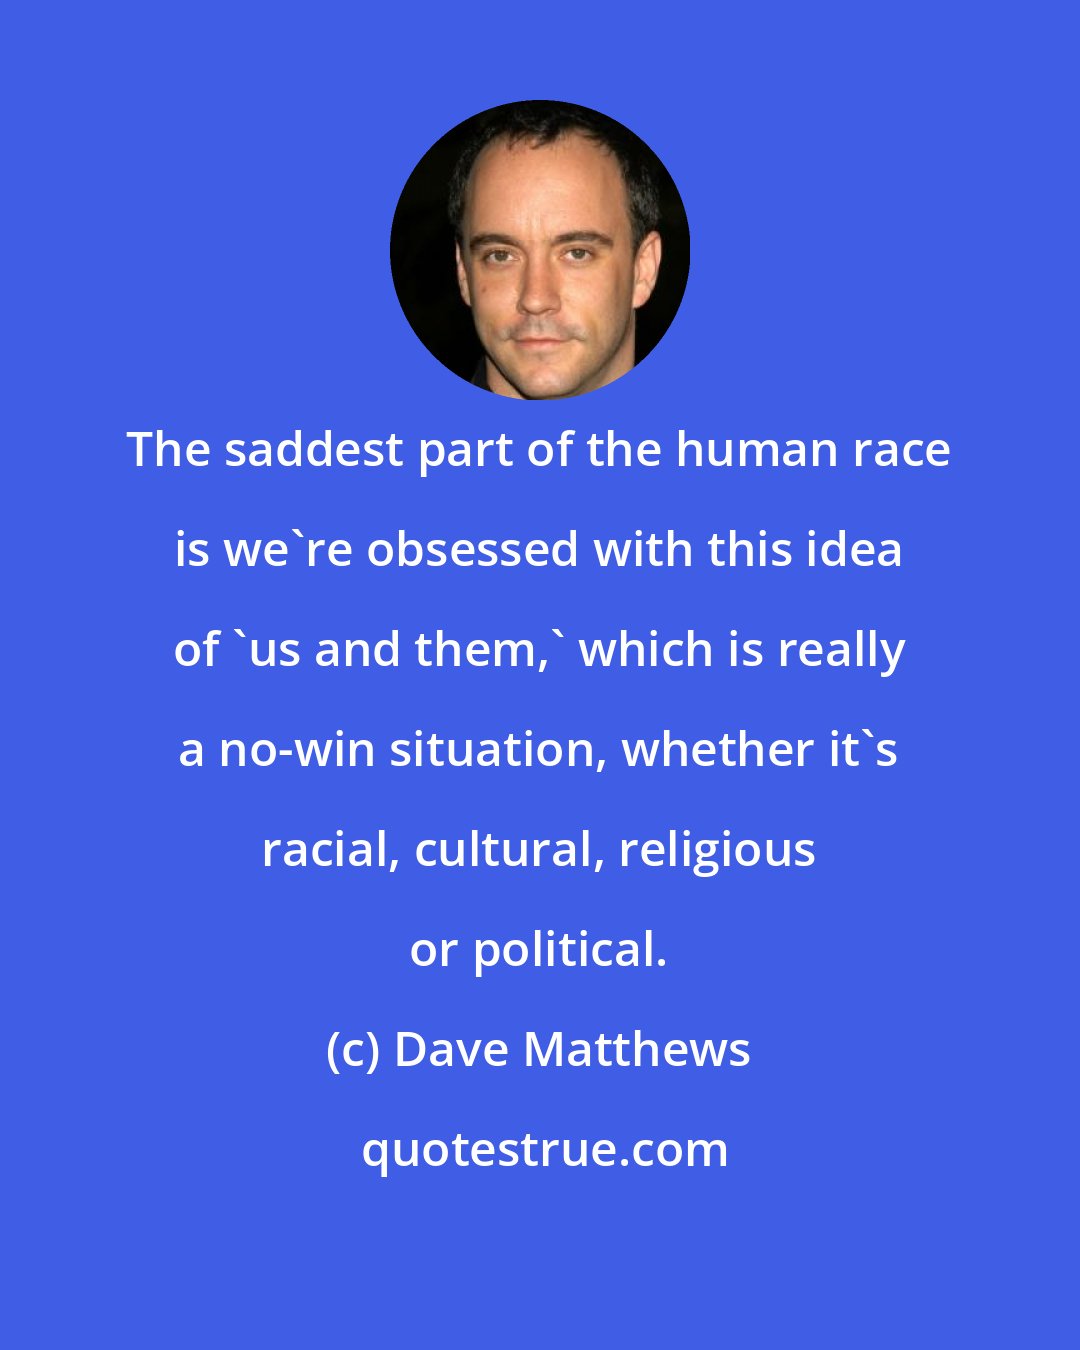 Dave Matthews: The saddest part of the human race is we're obsessed with this idea of 'us and them,' which is really a no-win situation, whether it's racial, cultural, religious or political.